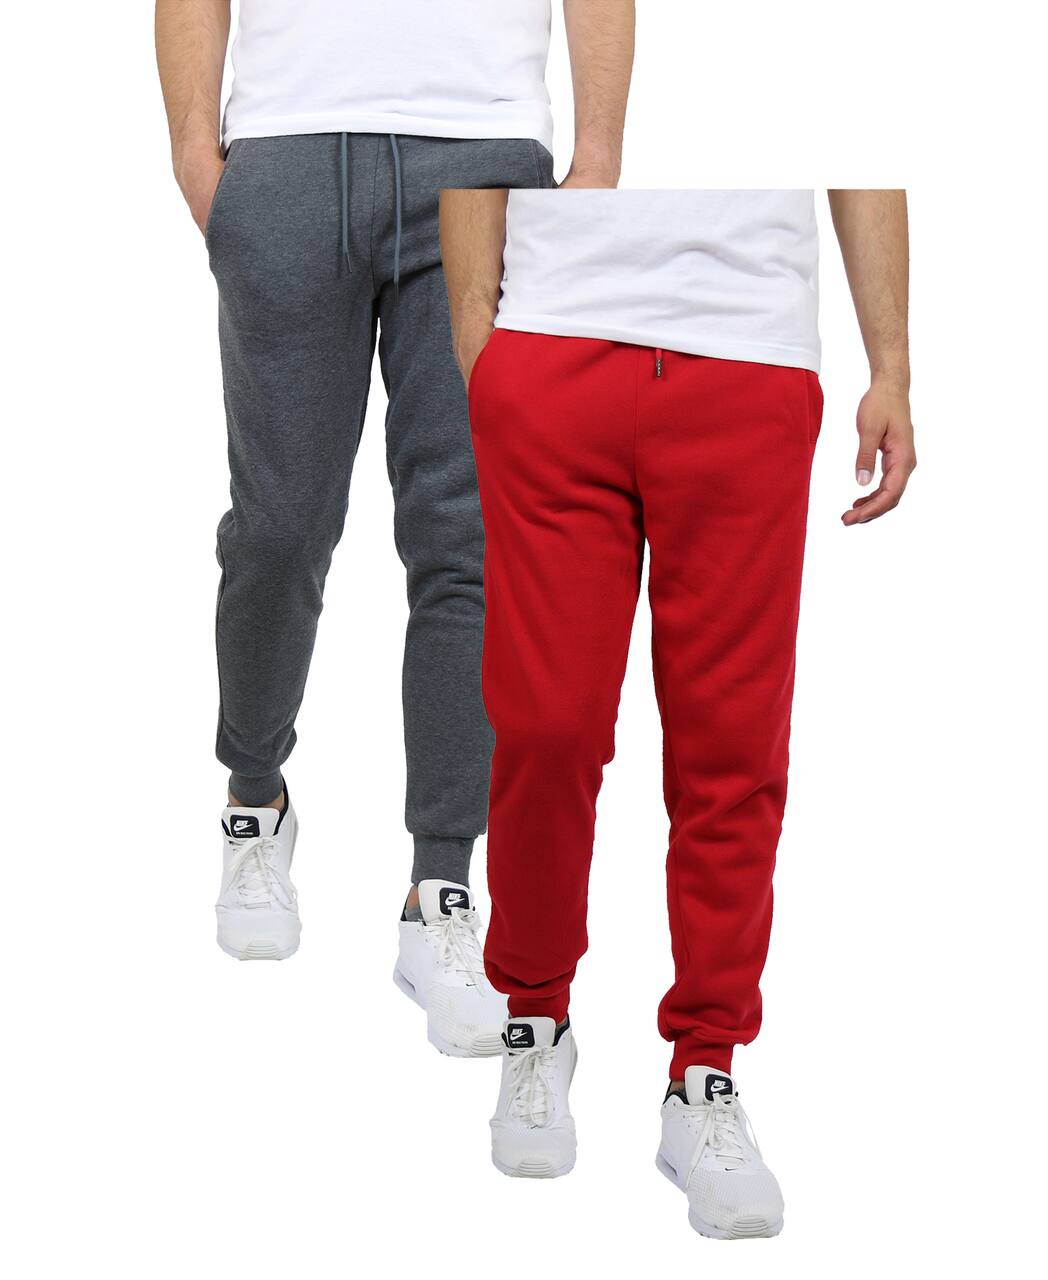 Galaxy by Harvic Men&#x27;s Fleece-Lined Jogger Sweatpants 2 Pack